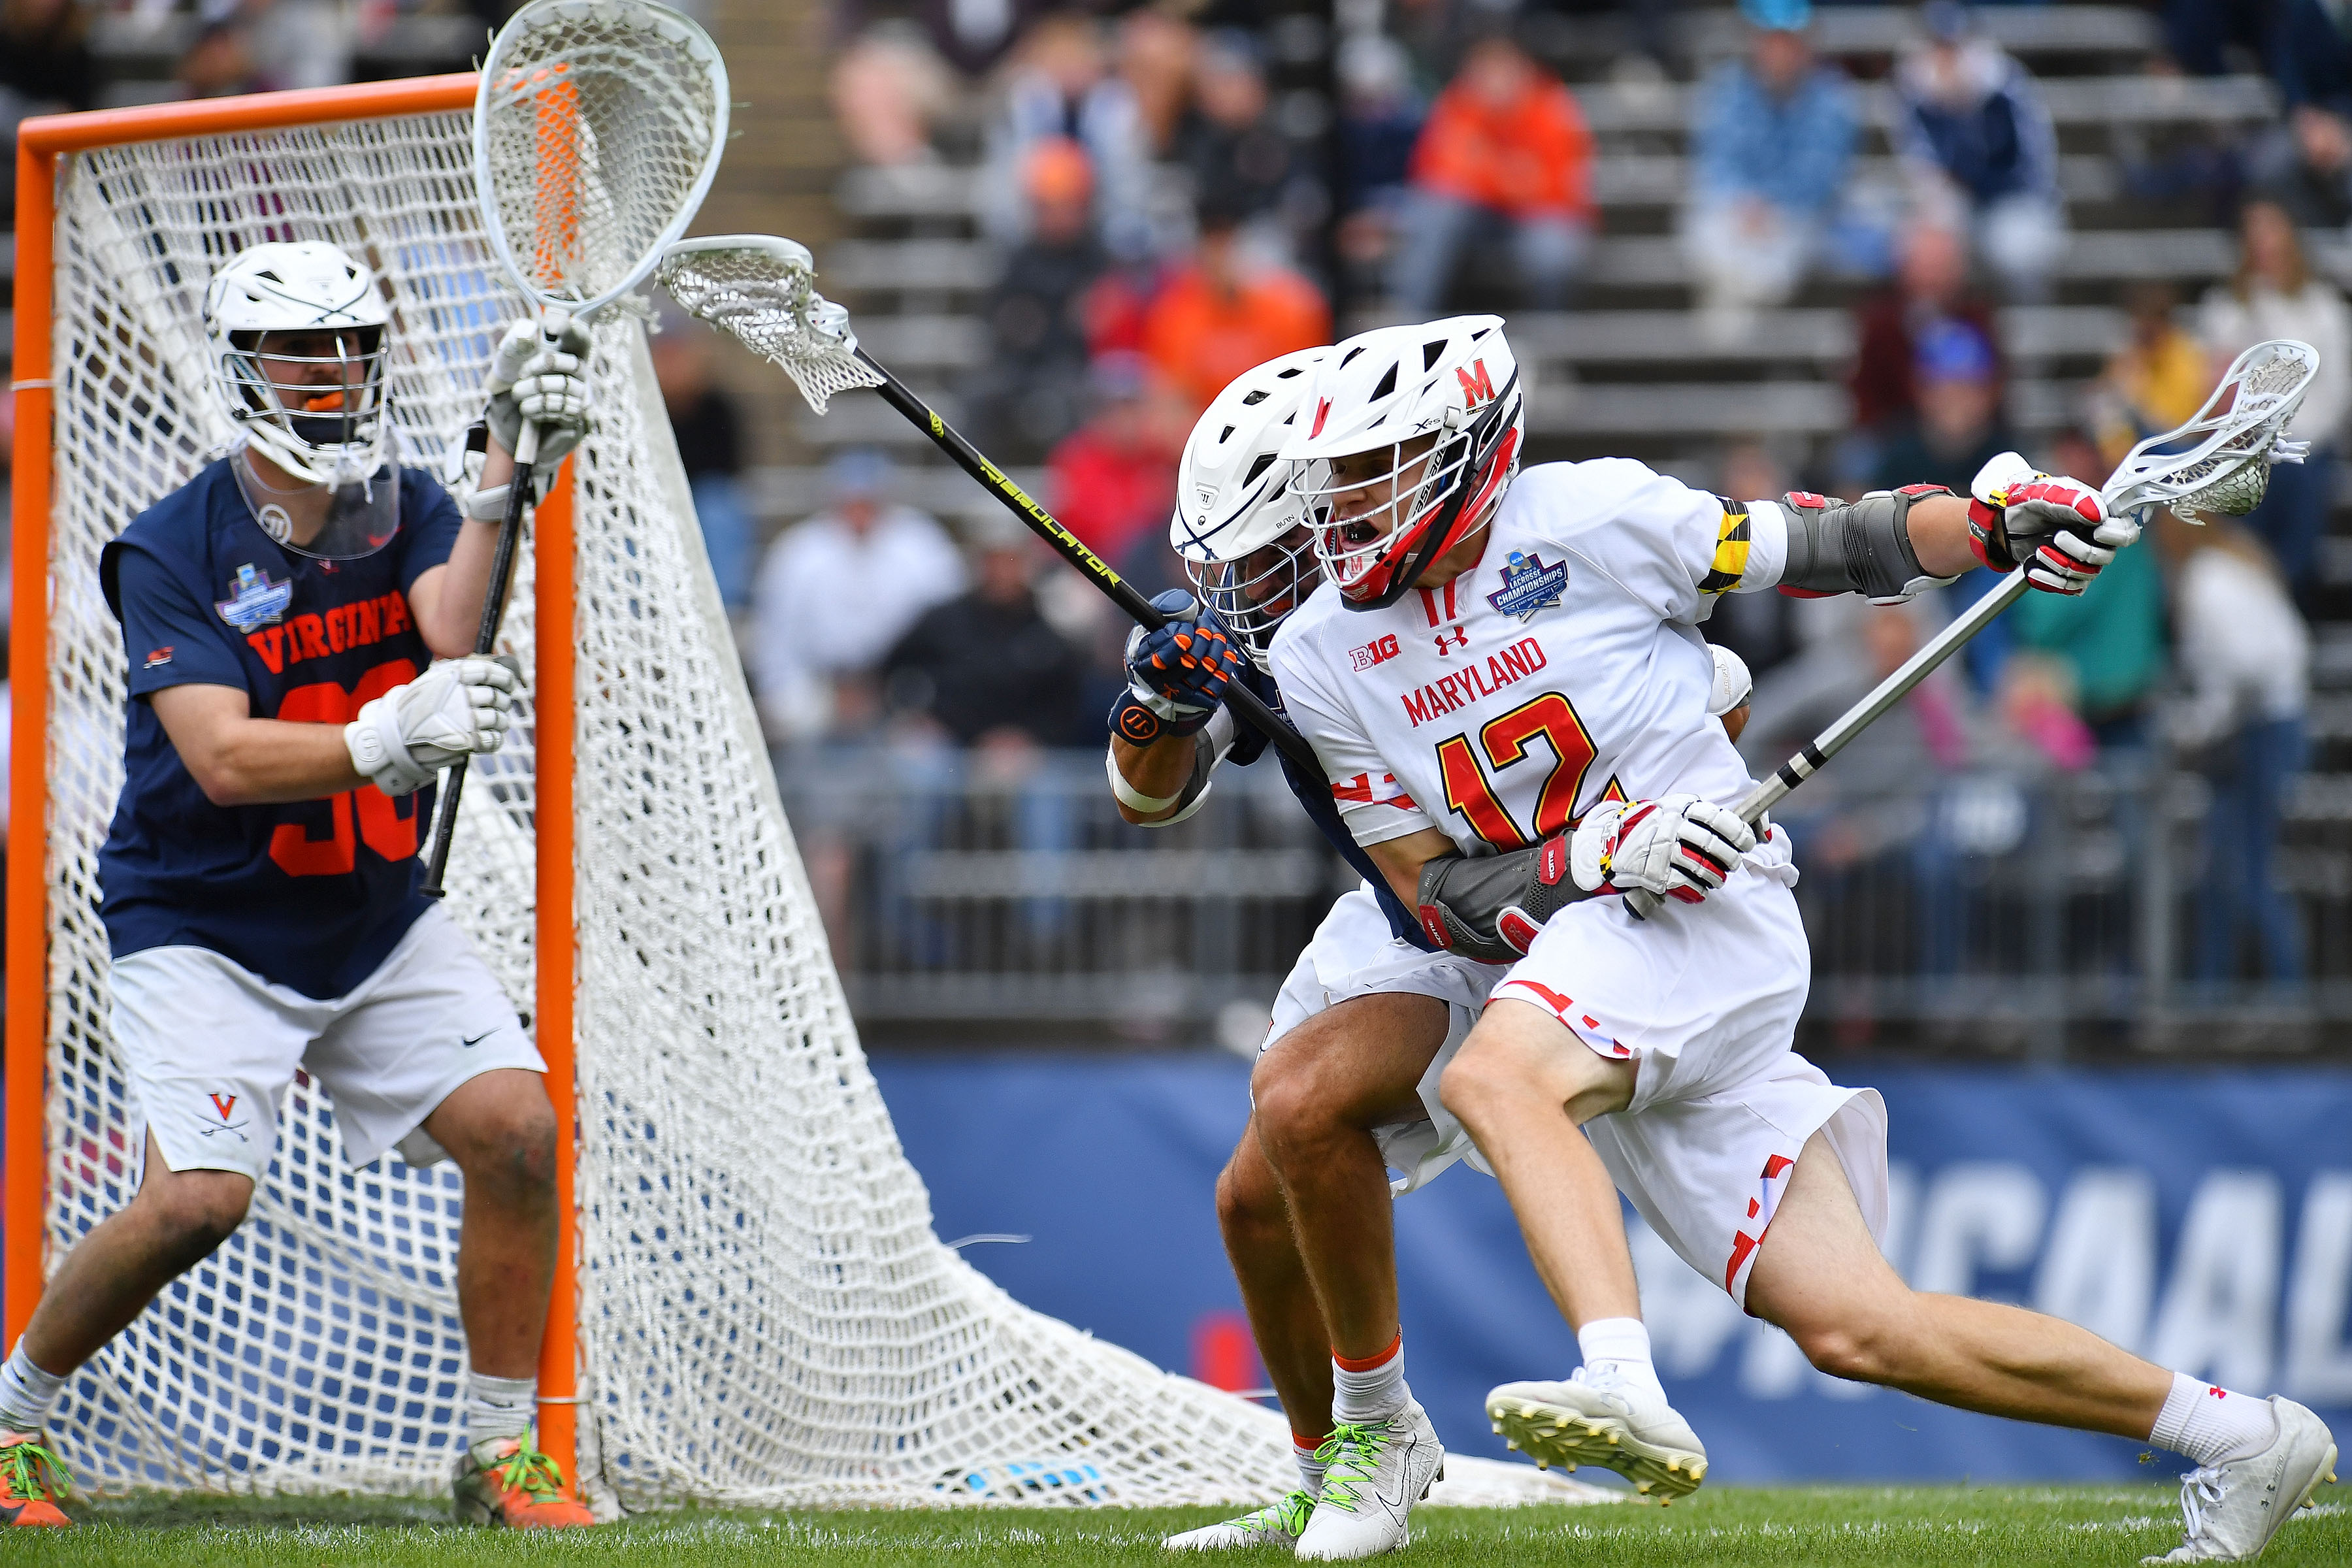 NCAA Lacrosse Championship 2021 Virginia Holds off Maryland's Late